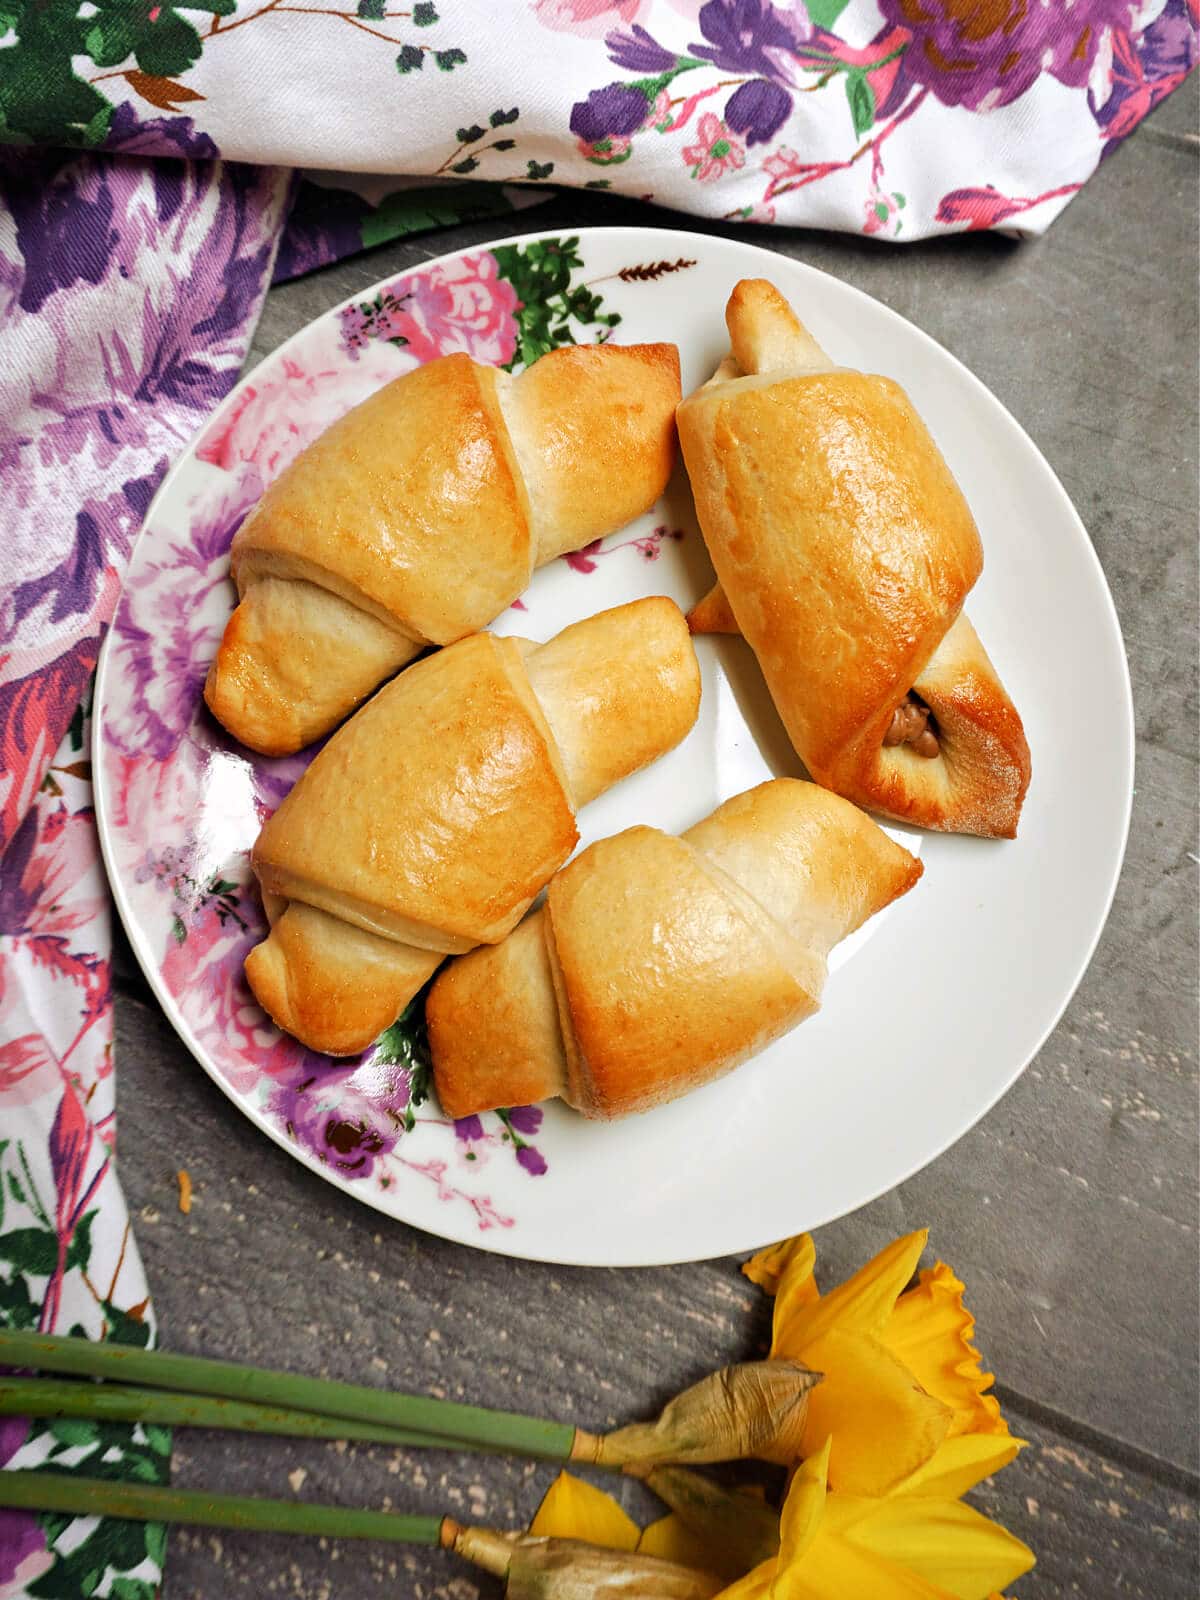 Overhead shoot of a plate with 4 crescent rolls